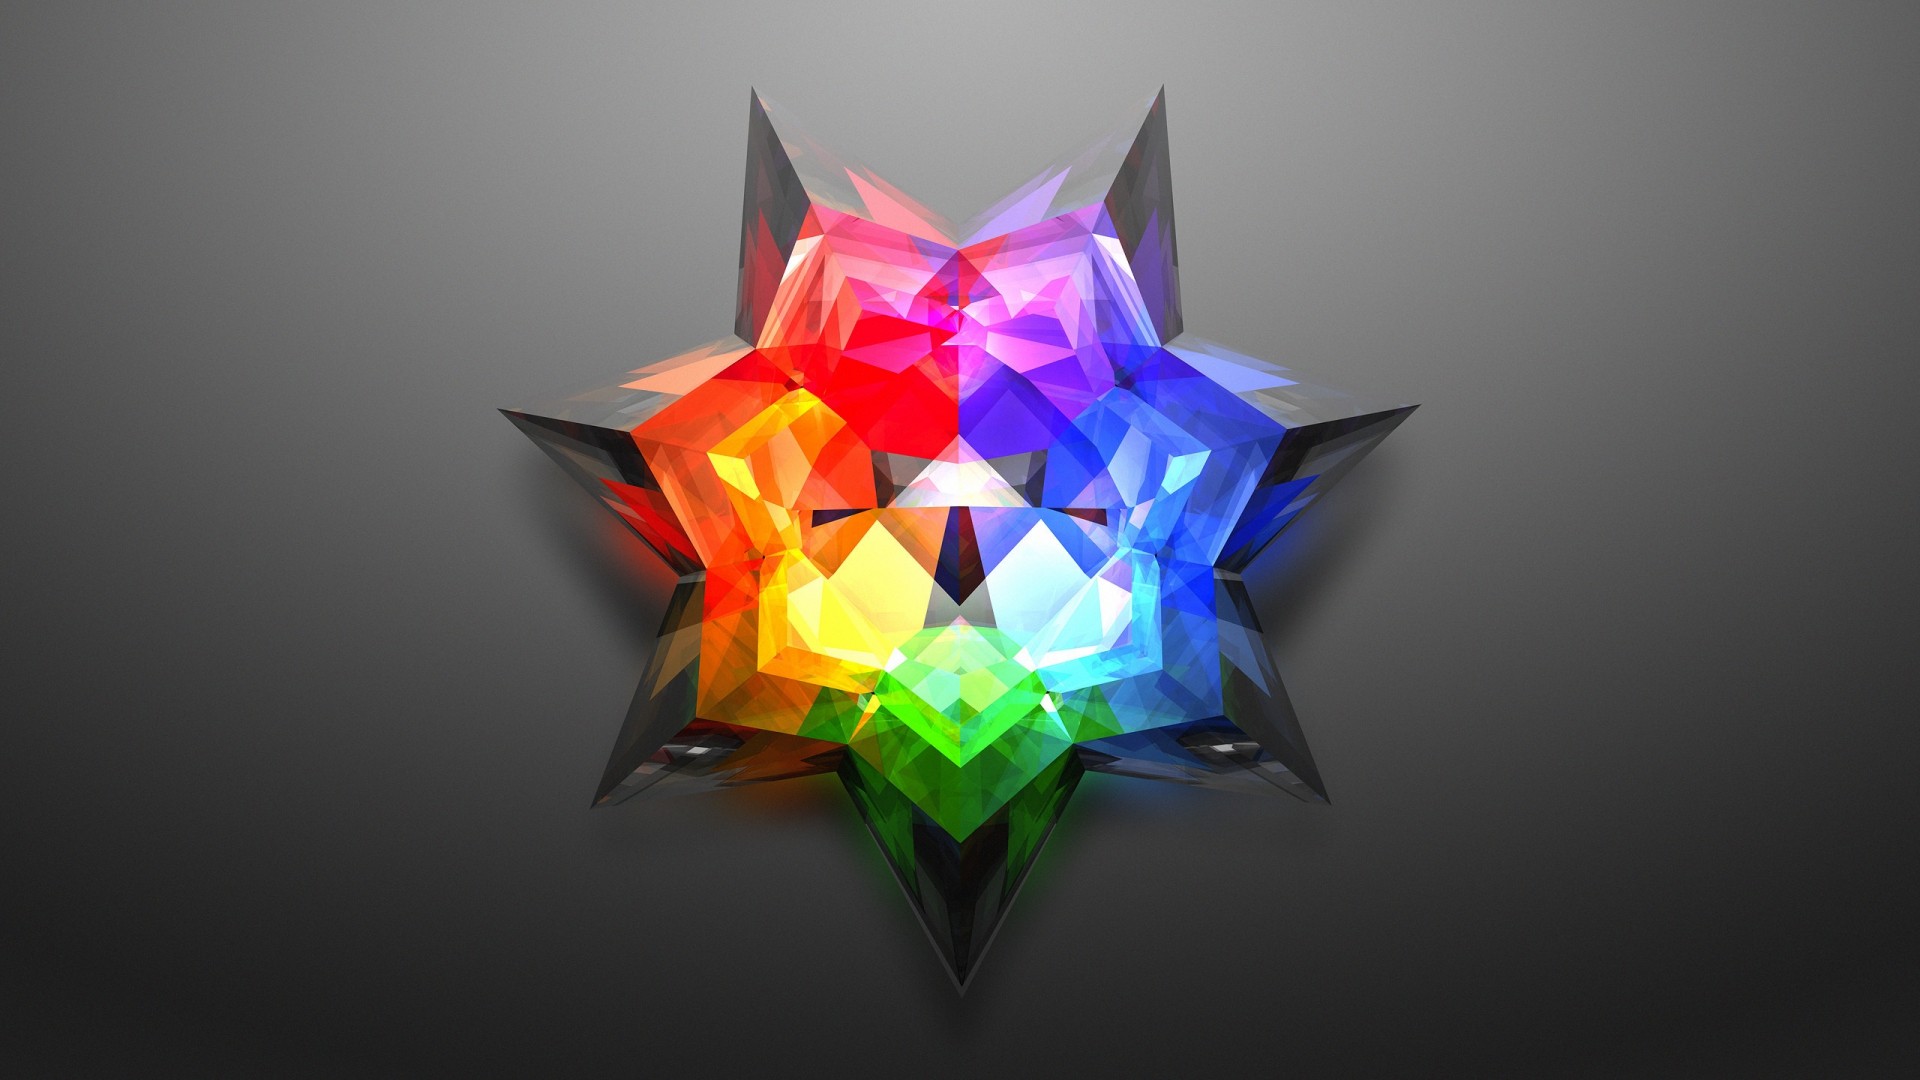 General 1920x1080 digital art minimalism colorful abstract low poly geometry CGI gradient gray background glowing triangle stars